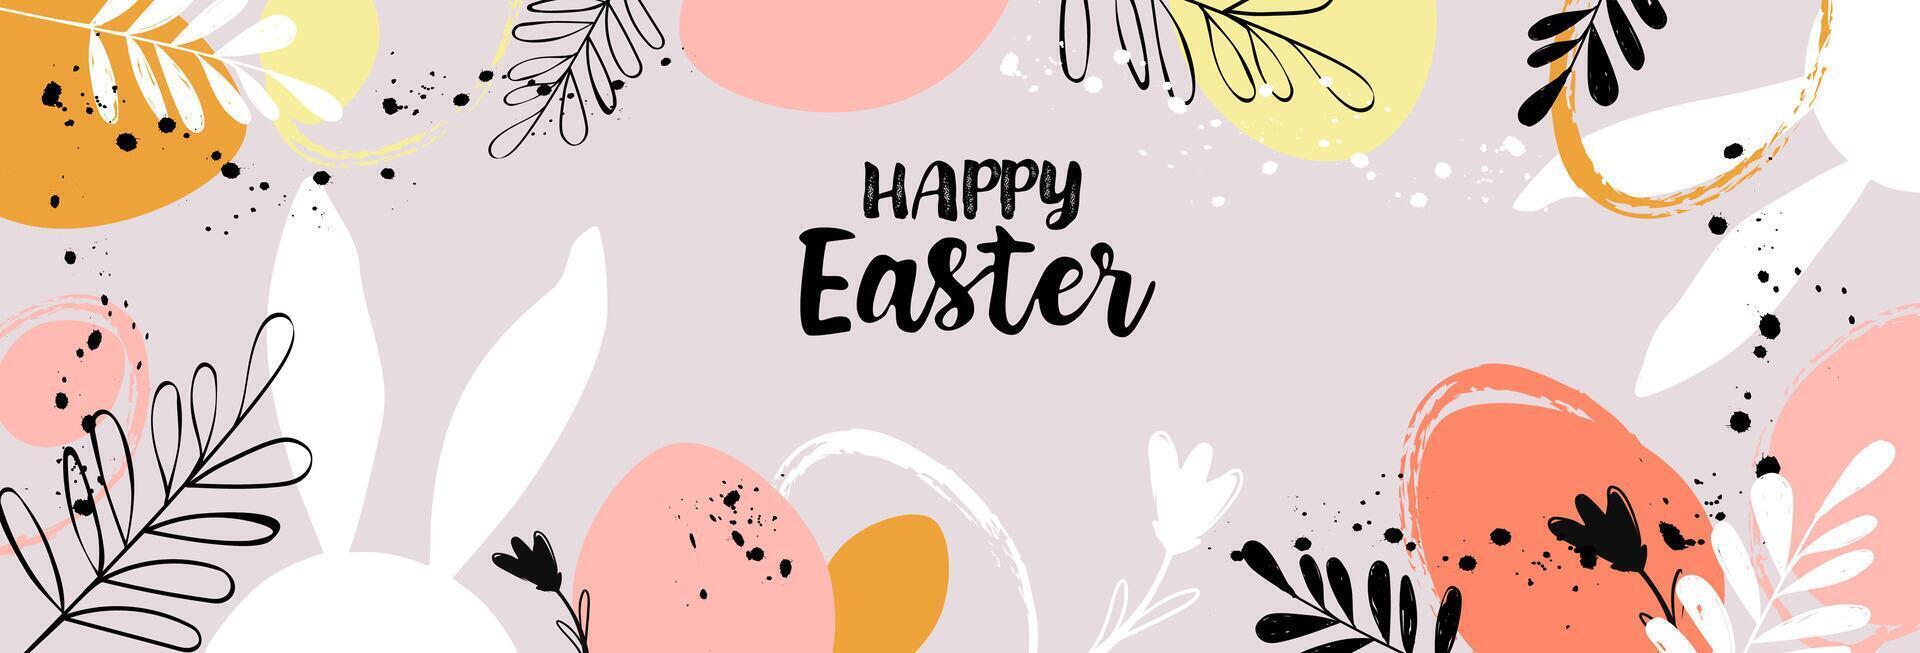 Vector Happy Easter banner Trendy Easter design, hand painted elements, silhouettes of eggs bunny rabbit and leaves flowers in pastel colors. Modern flat minimalistic style. Horizontal poster, card